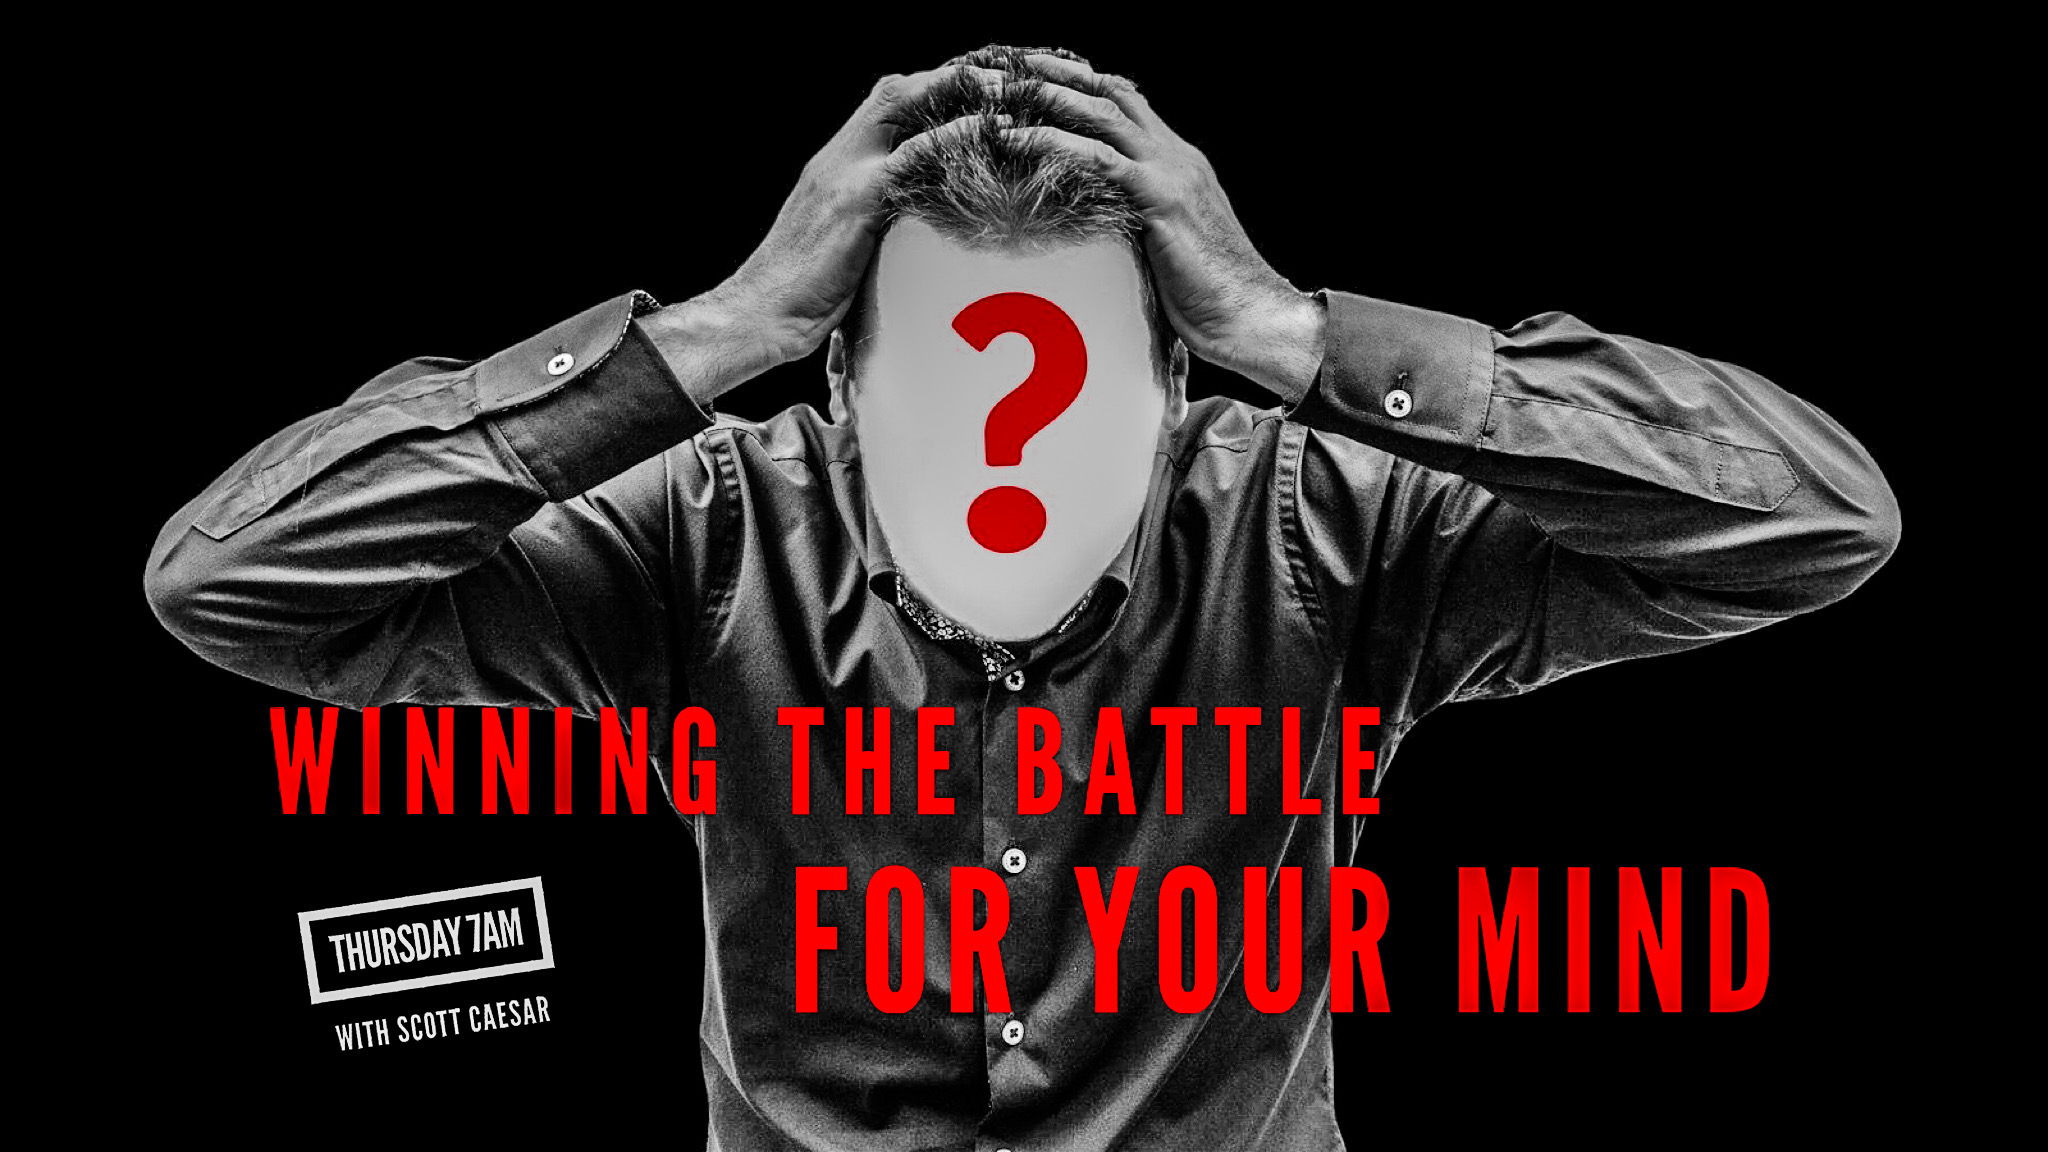 Winning the Battle for Your Mind